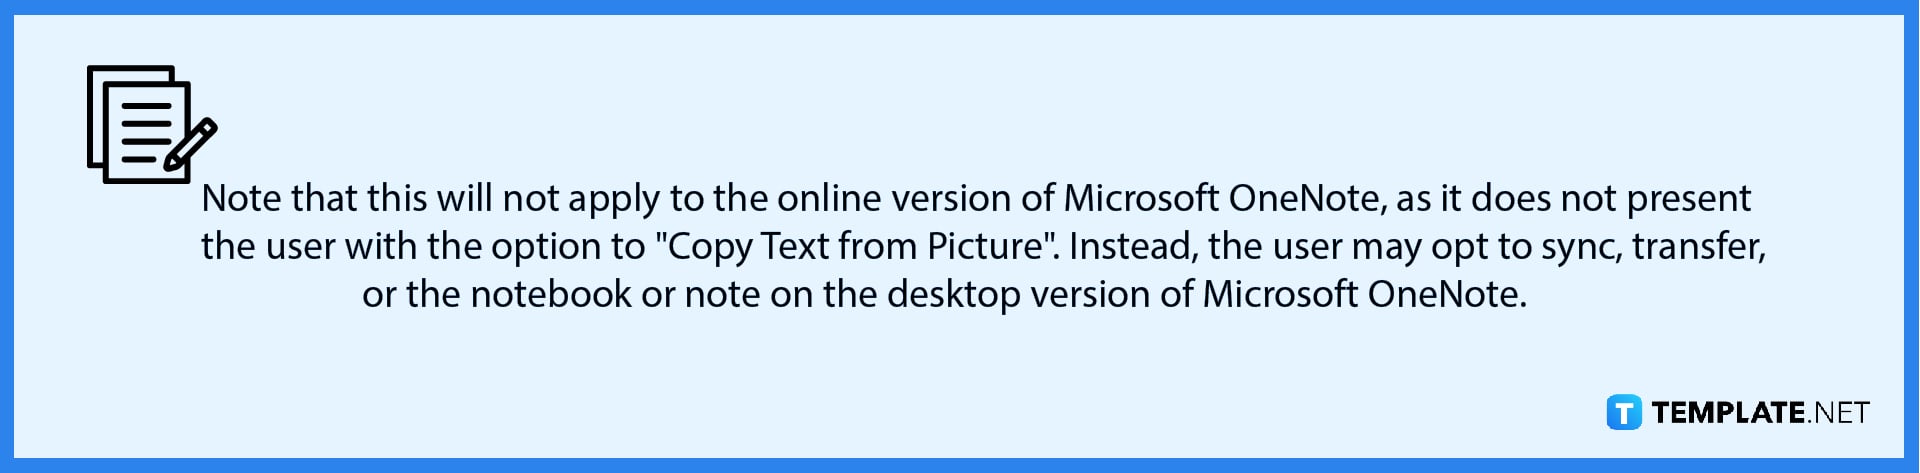 how-to-copy-text-from-images-in-microsoft-onenote-note-1